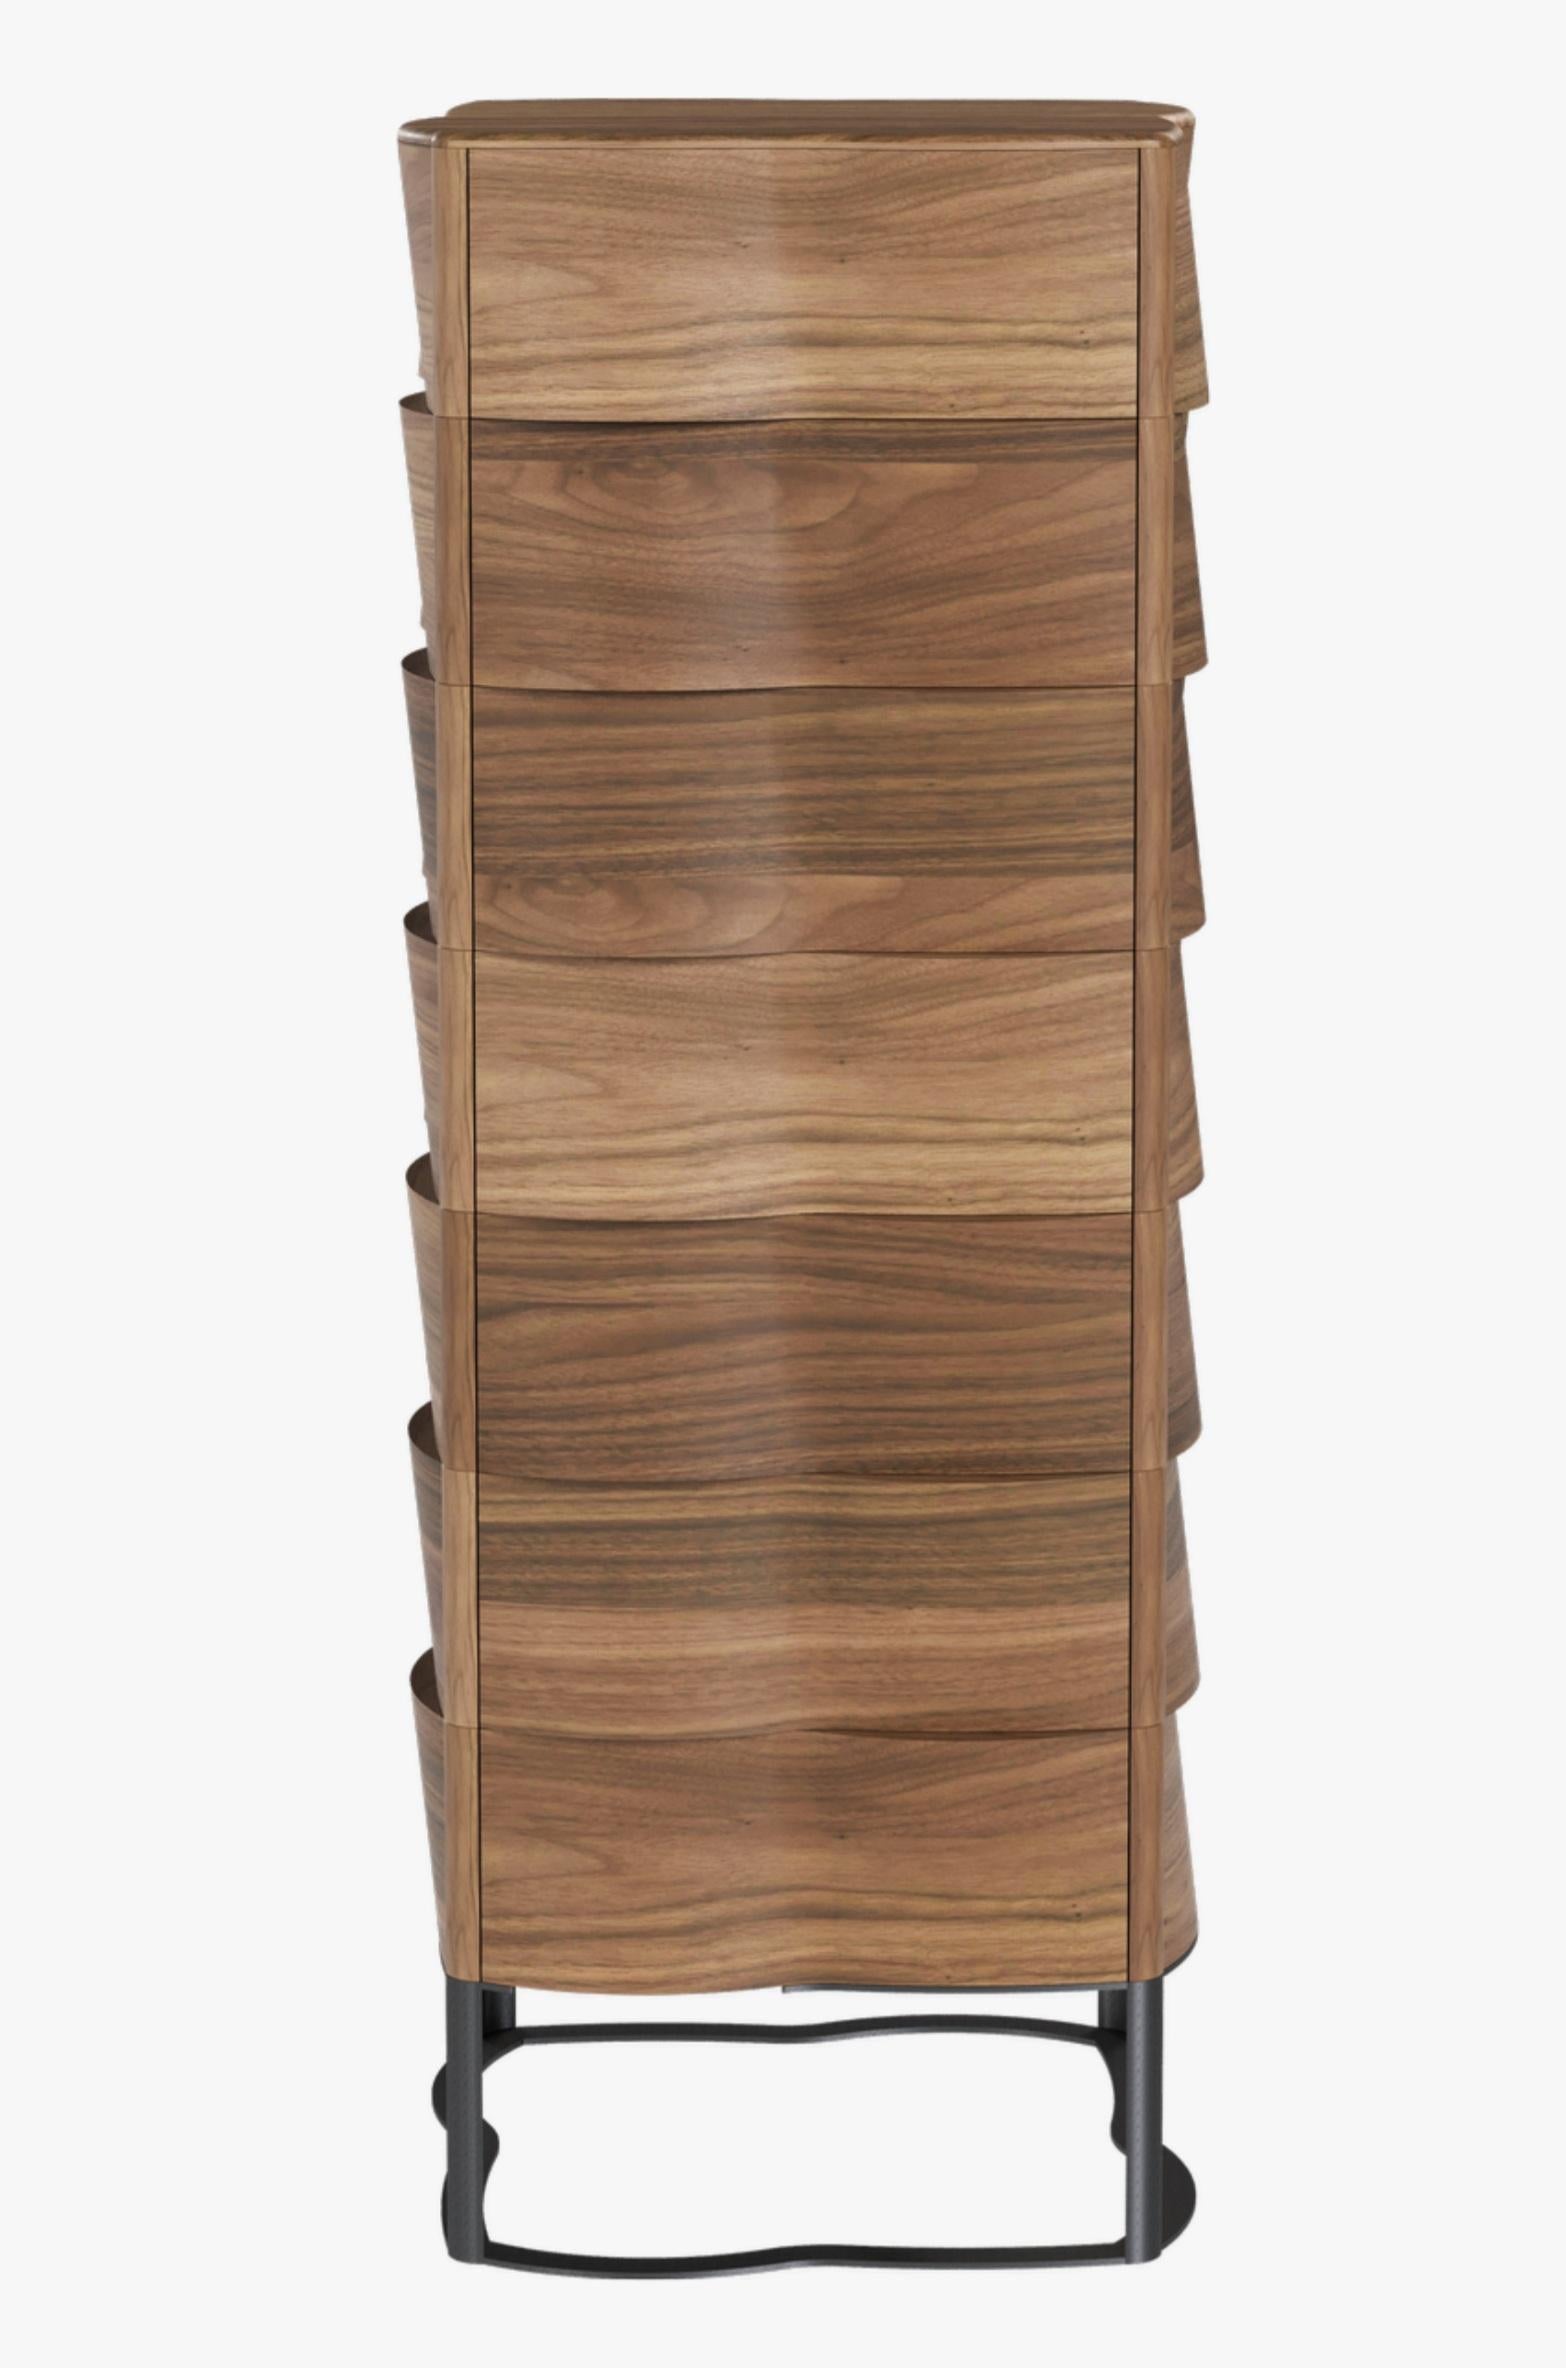 Stunning Sculptural Design creation Walnut chest of drawers with a round shaped silhouette that reveals the wood flexibility and beauty and wakens the desire of feeling its shape by touch.
It stands out for the elegance with which the combination